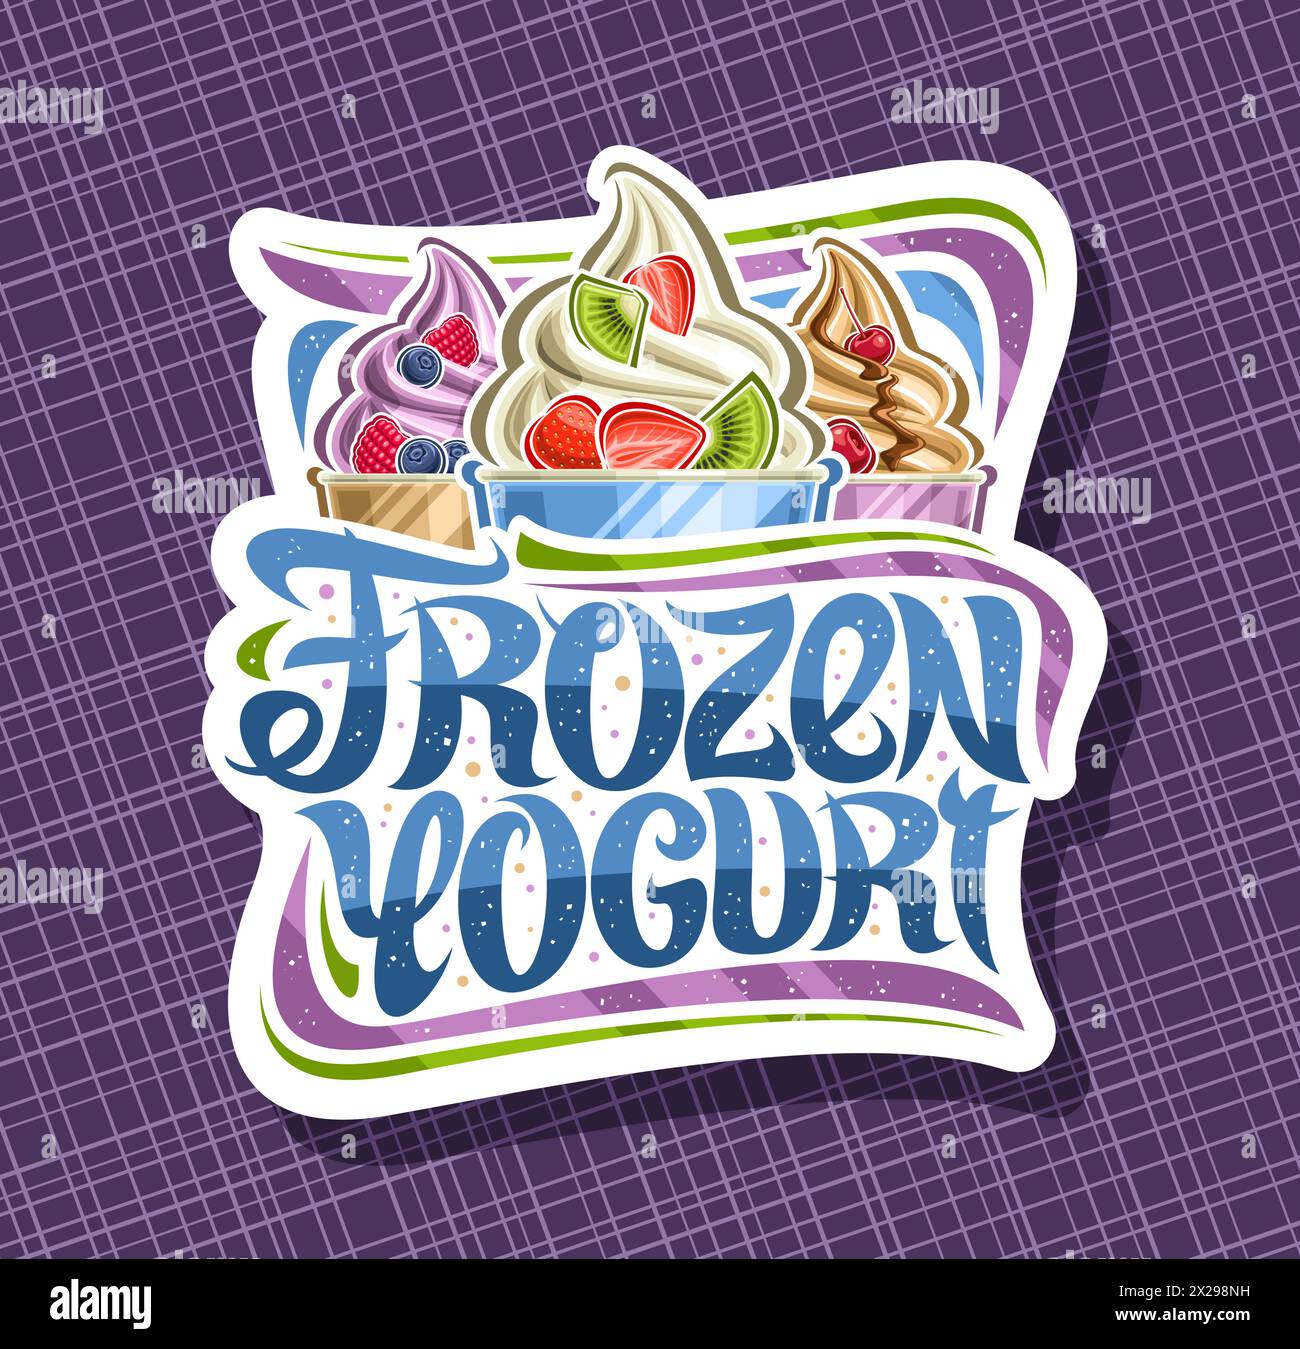 Vector logo for Frozen Yogurt, decorative cut paper signboard with illustration of three variety colorful ice creams with fresh fruits slices in carto Stock Vector